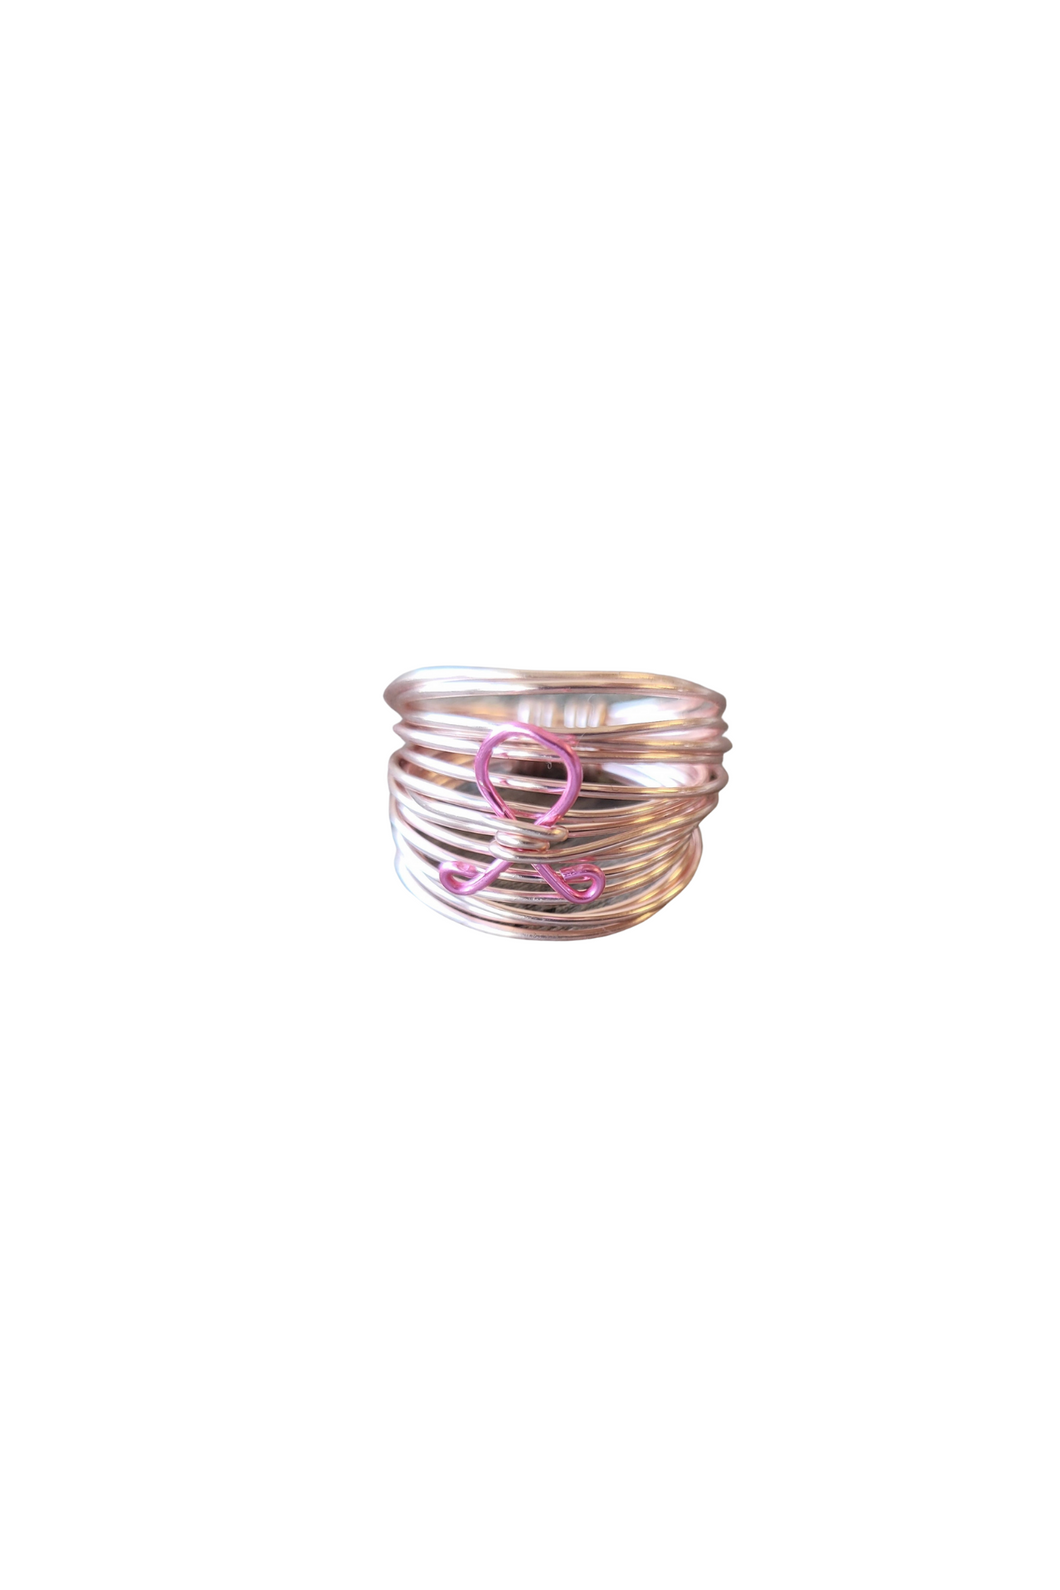 Marcia Wire Wrap Ring in Rose Gold with Breast Cancer Ribbon